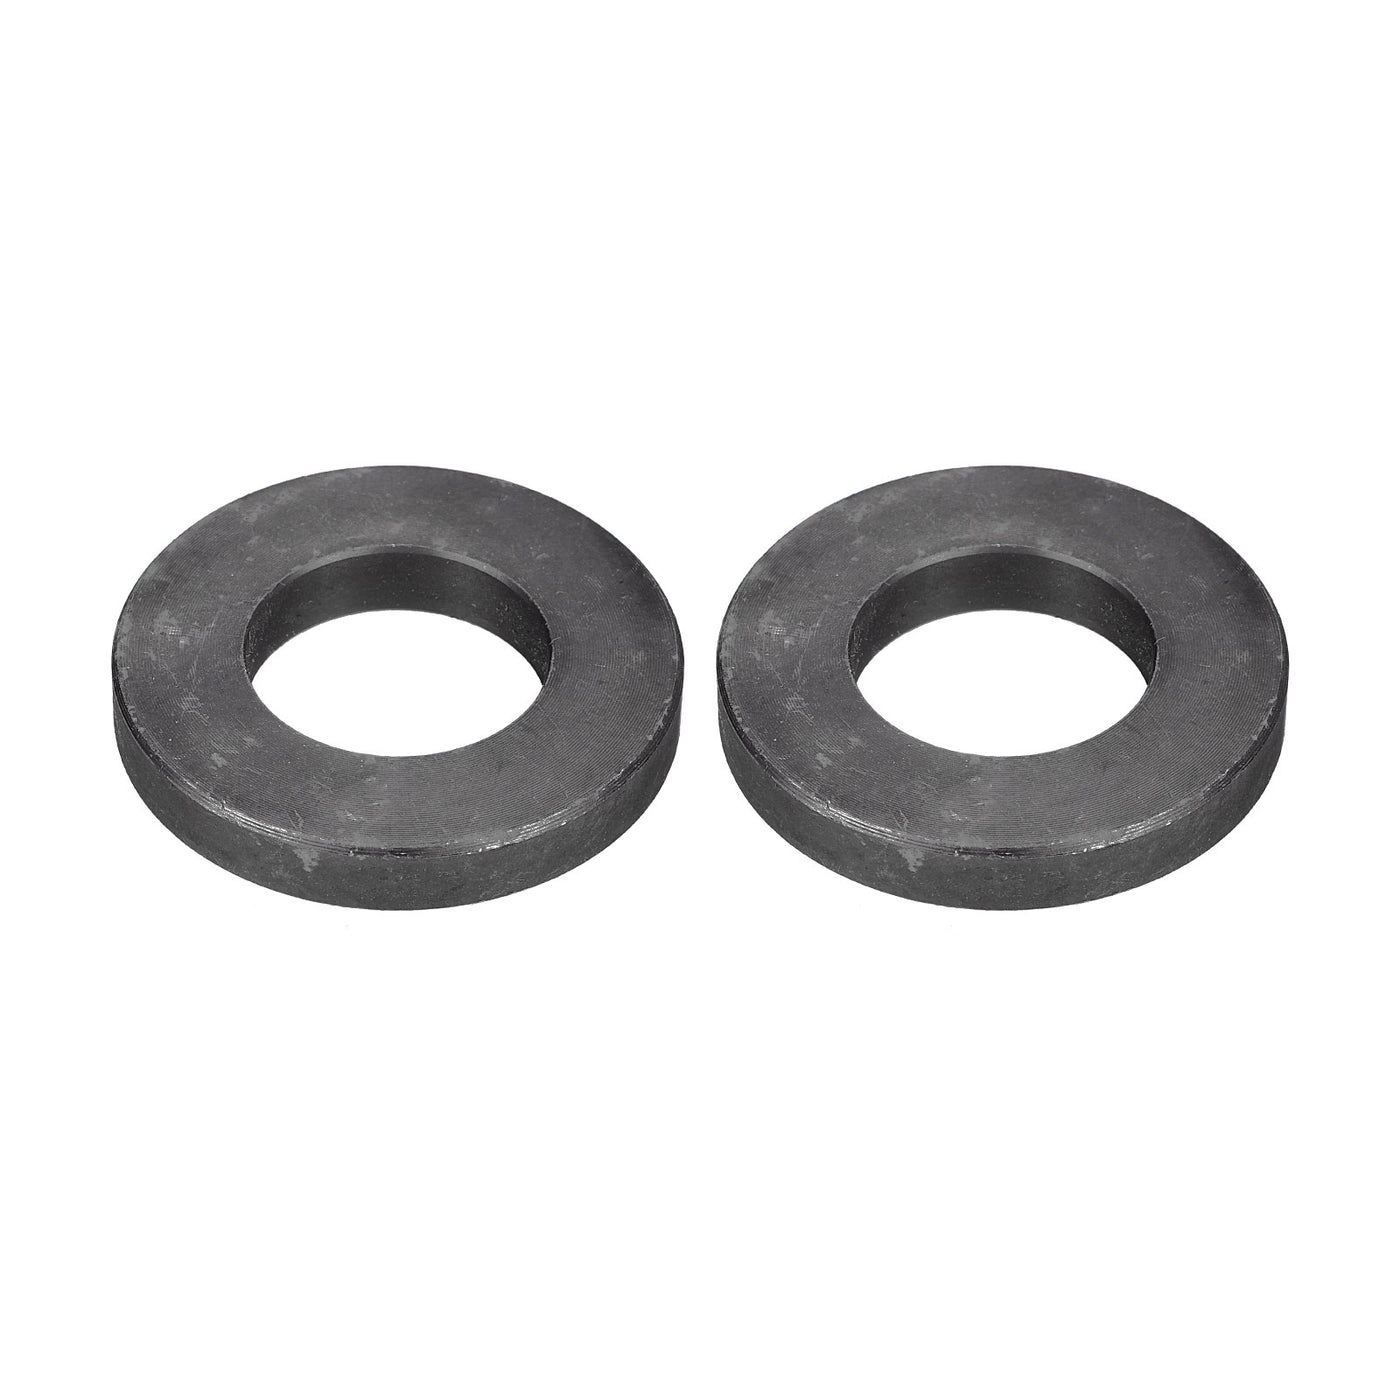 uxcell Uxcell M27 Carbon Steel Flat Washer 2pcs 27x52x8mm Grade 8.8 Alloy Steel Fasteners